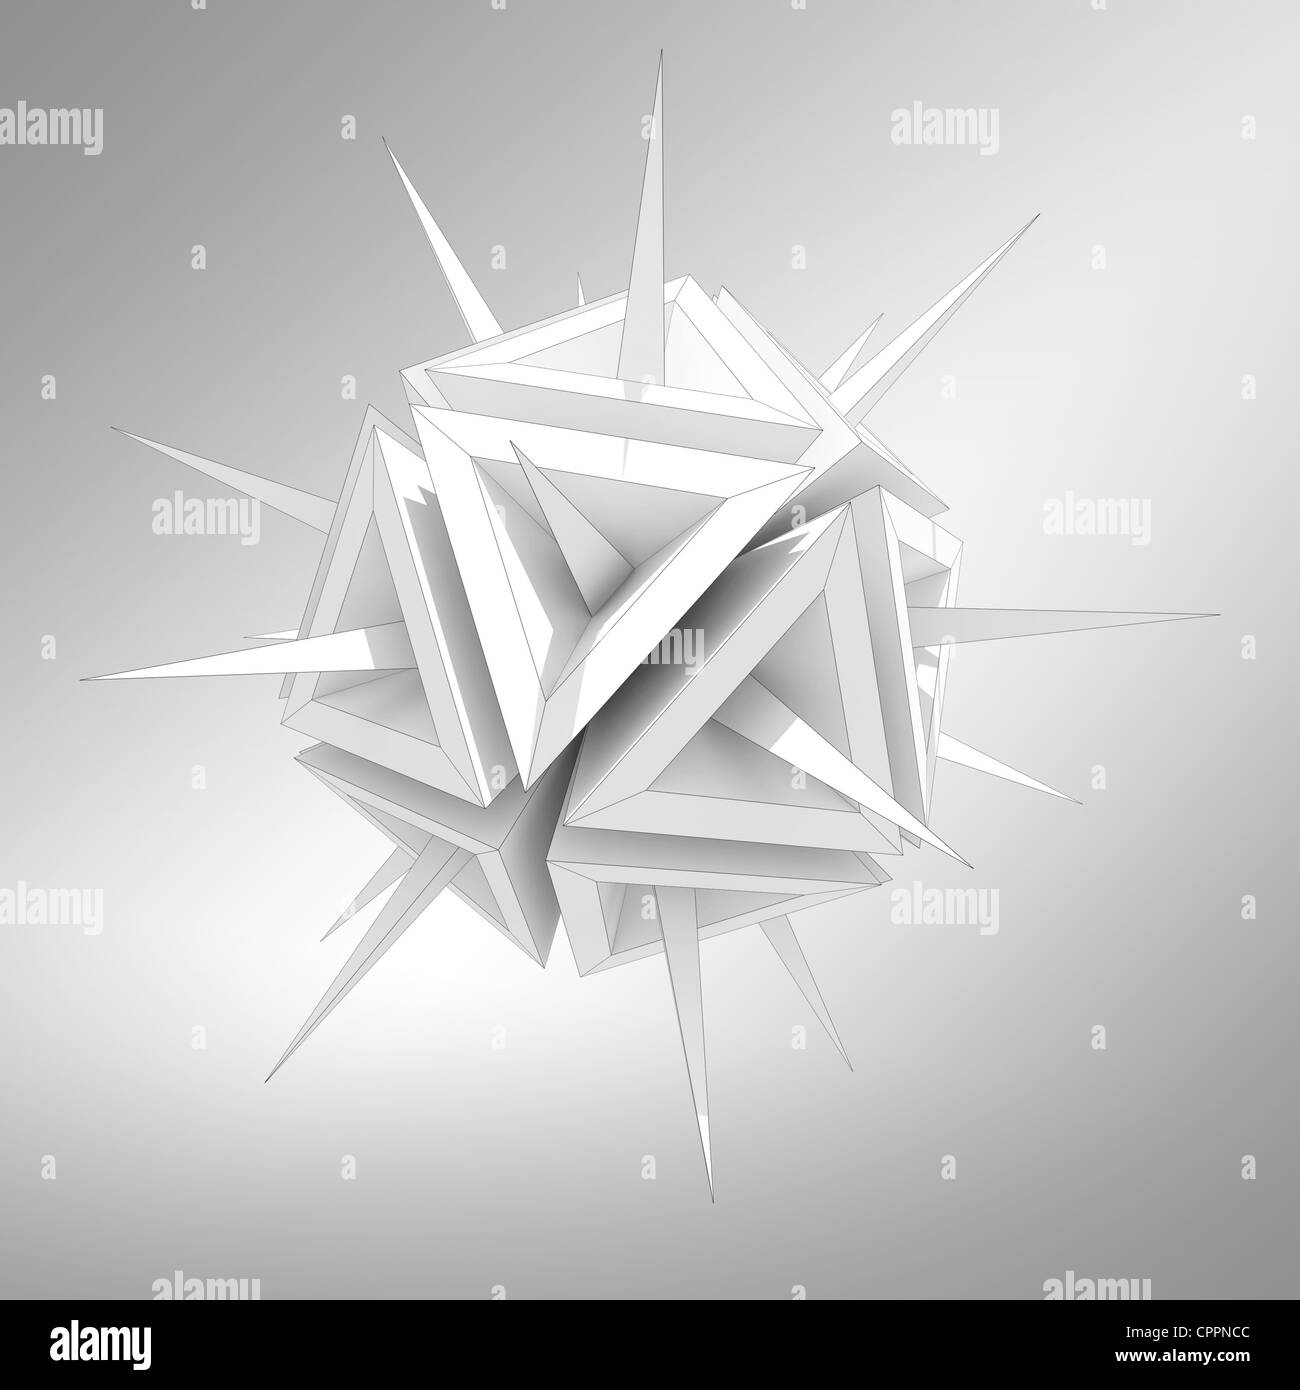 Abstract illustration of a virus as a white sharp object with spikes Stock Photo